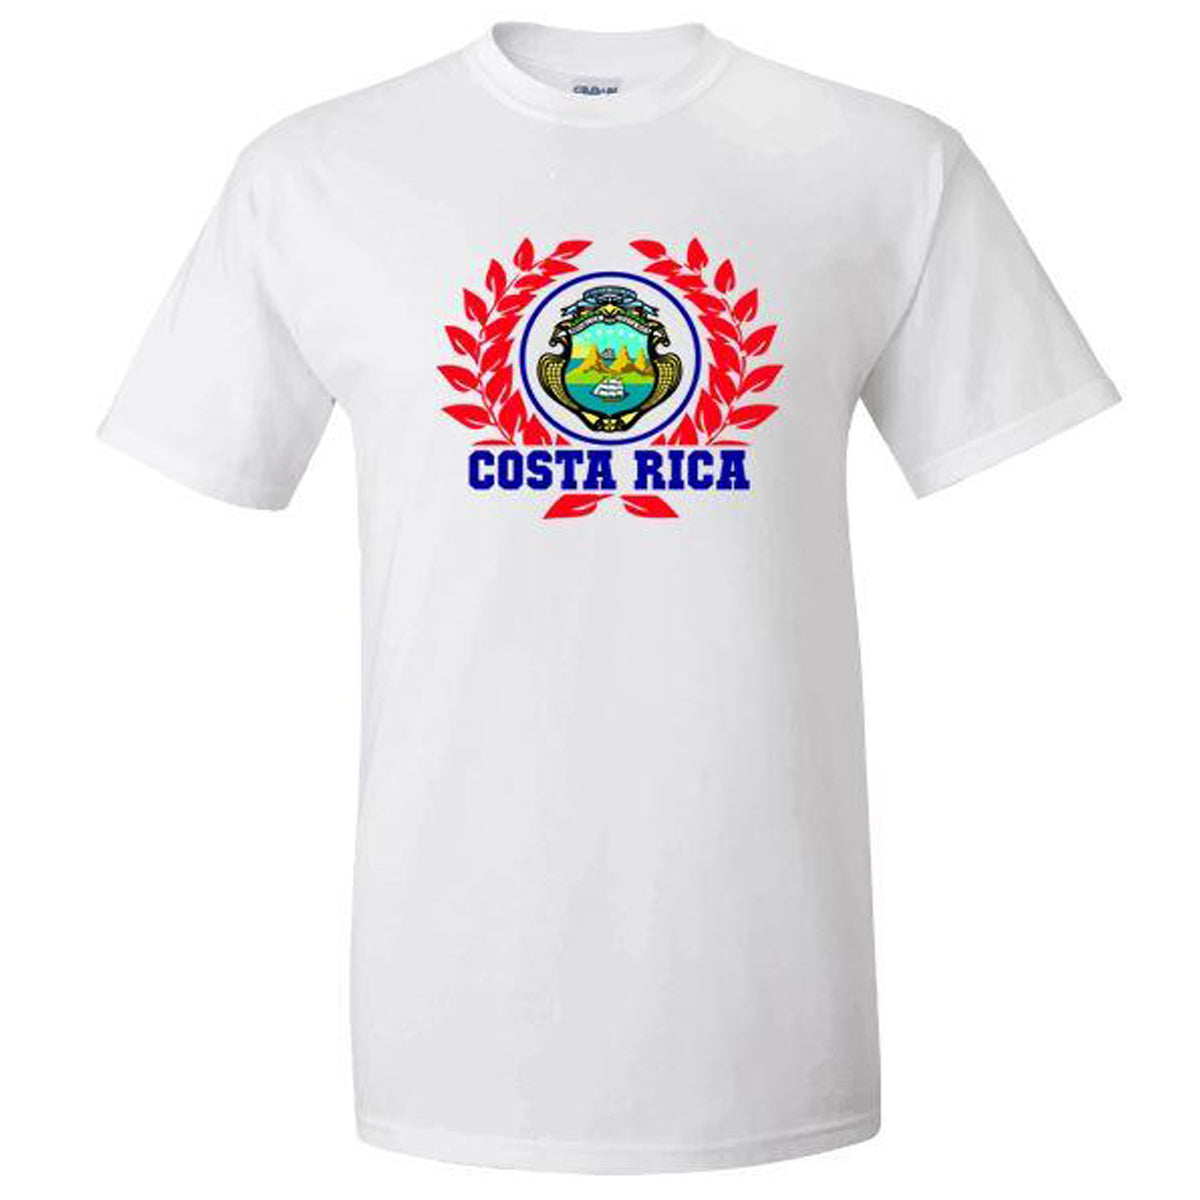 Costa Rica World Cup 2022 Spirit Tee | Various Designs Shirt 411 Leaves Youth Medium Youth